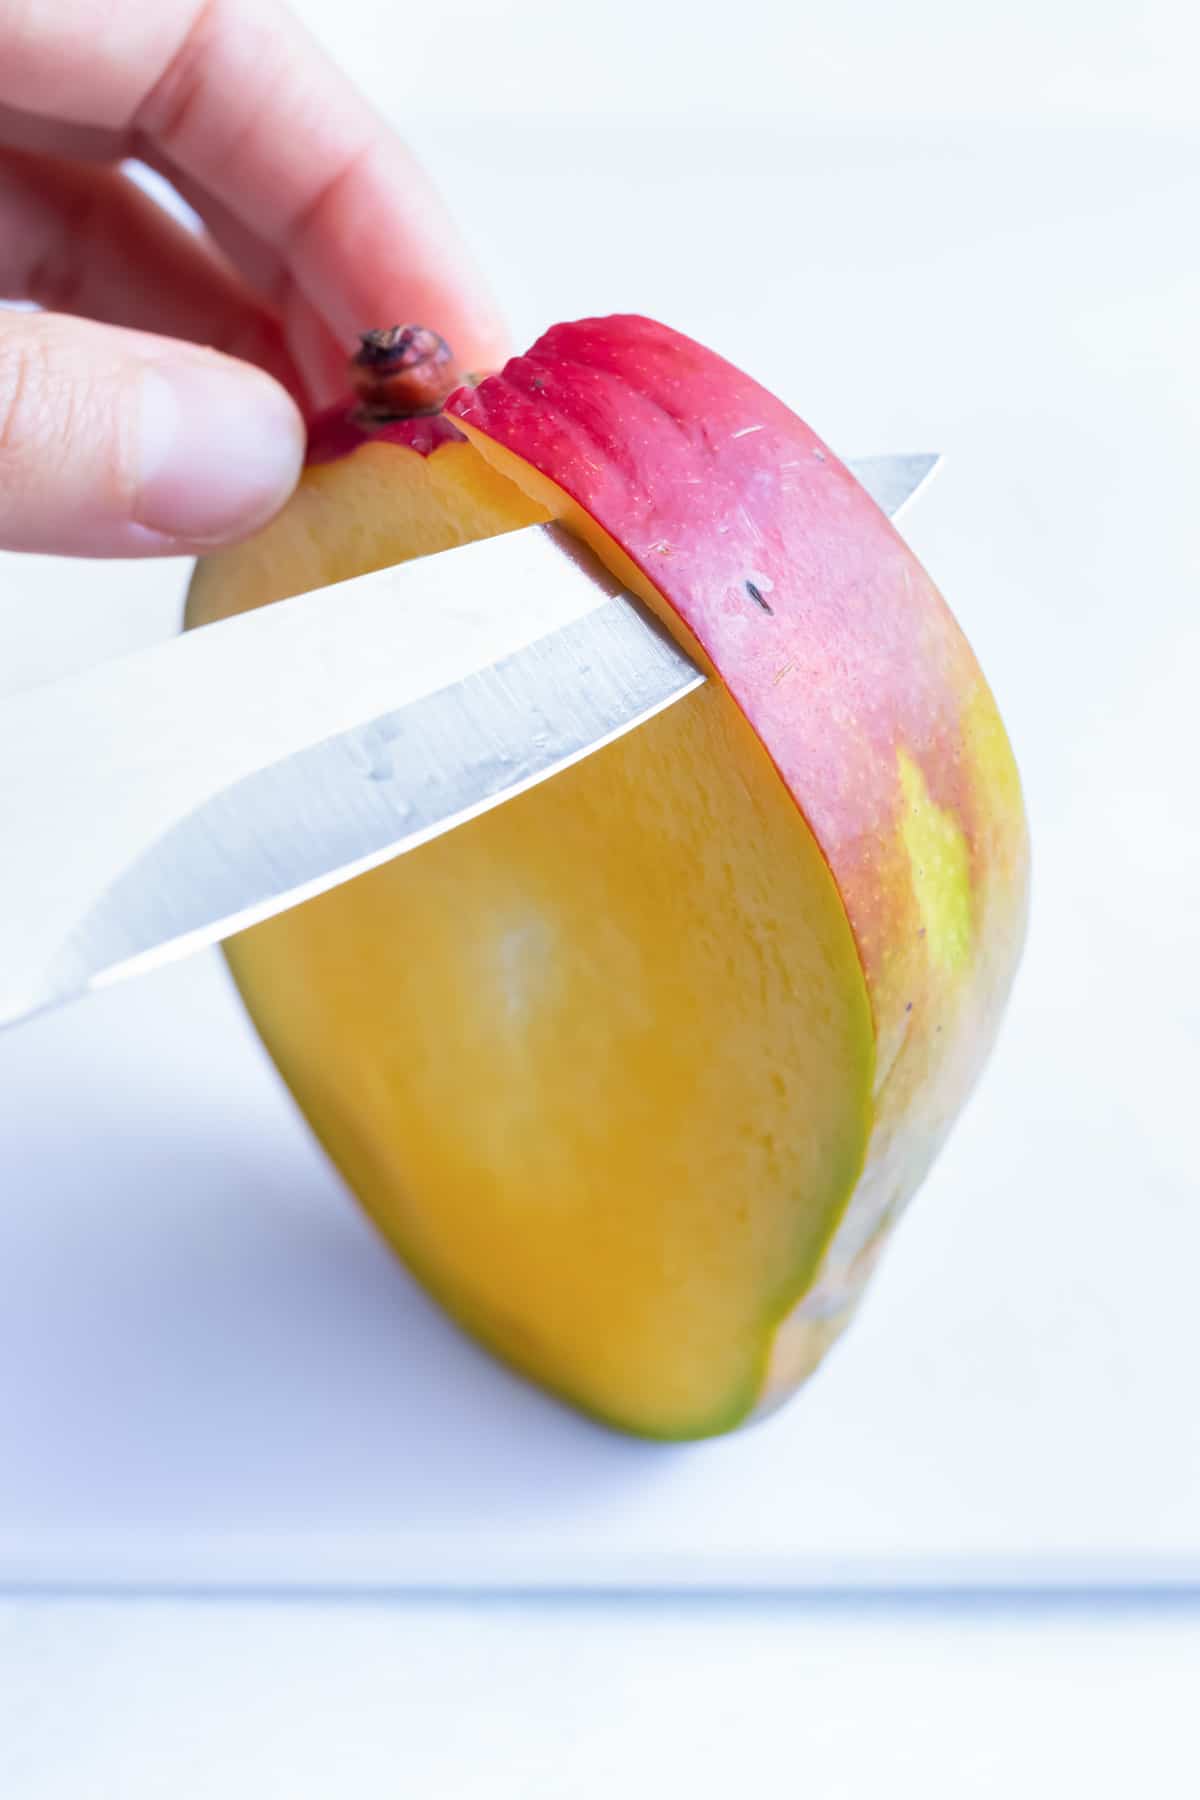 A small knife removes the peel from a wedge of mango.